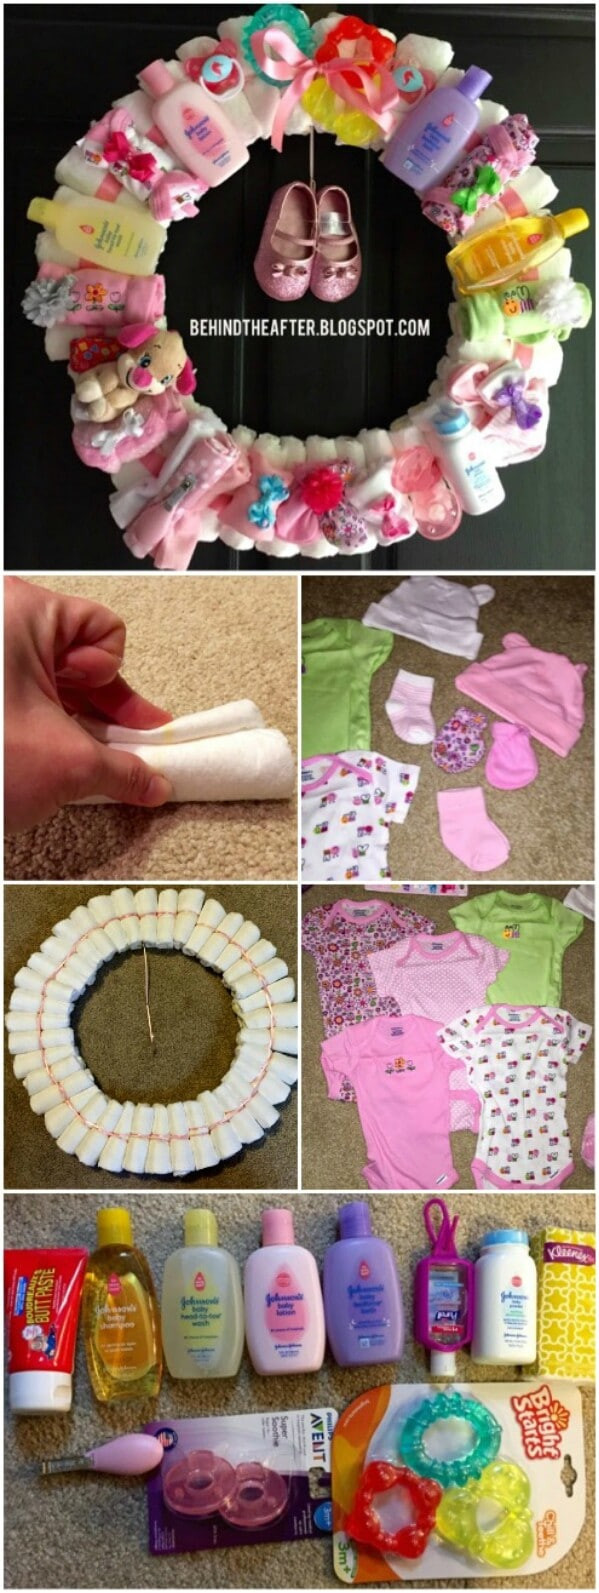 Diaper Gift Ideas For Baby Shower
 25 Enchantingly Adorable Baby Shower Gift Ideas That Will